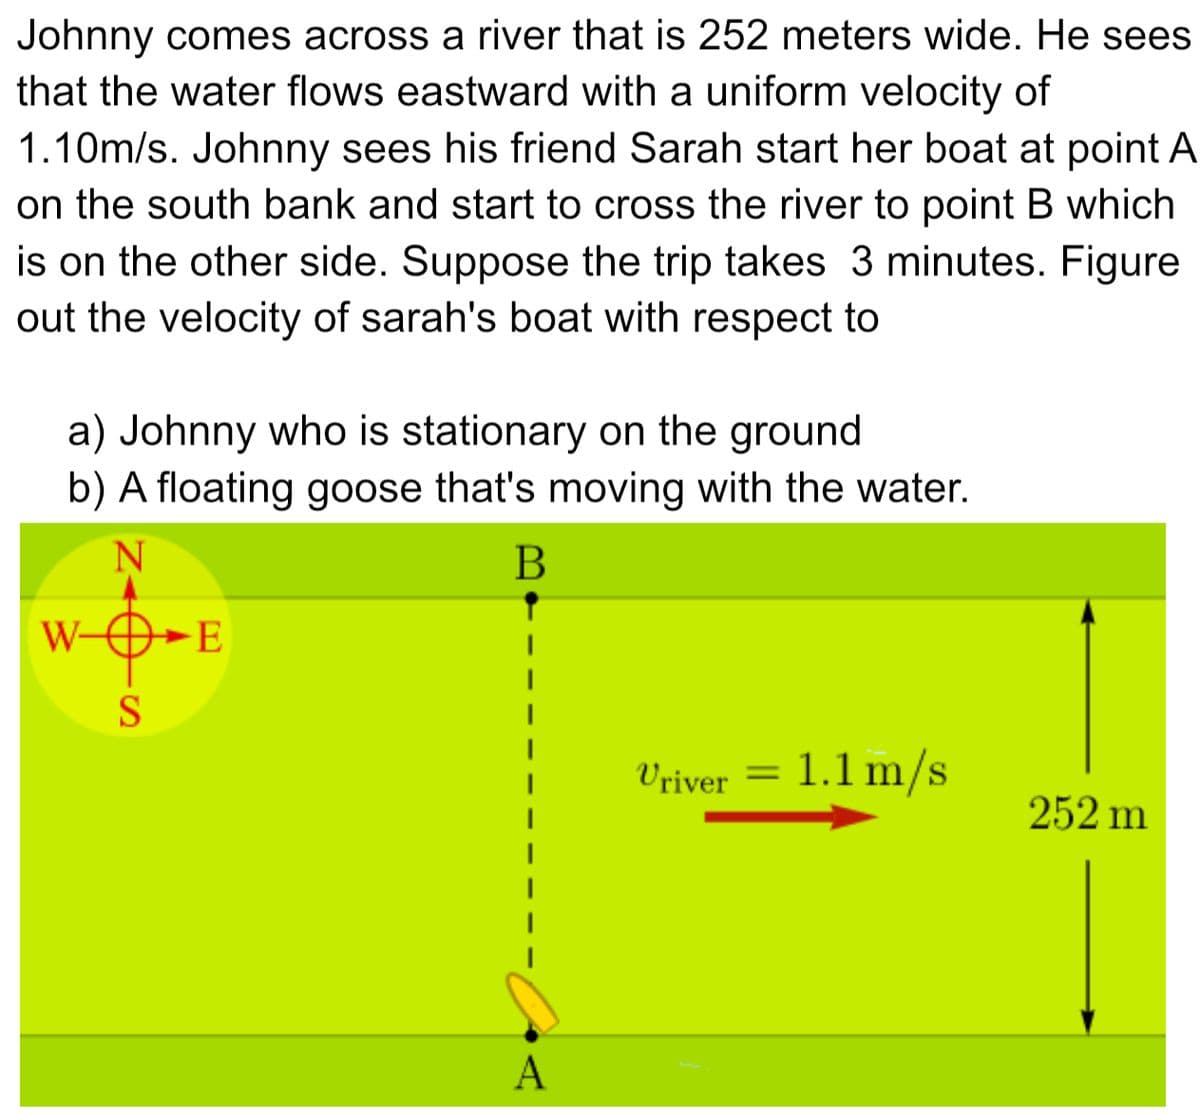 Johnny comes across a river that is 252 meters wide. He sees
that the water flows eastward with a uniform velocity of
1.10m/s. Johnny sees his friend Sarah start her boat at point A
on the south bank and start to cross the river to point B which
is on the other side. Suppose the trip takes 3 minutes. Figure
out the velocity of sarah's boat with respect to
a) Johnny who is stationary on the ground
b) A floating goose that's moving with the water.
N
B
W-E
S
Vriver = 1.1 m/s
A
252 m